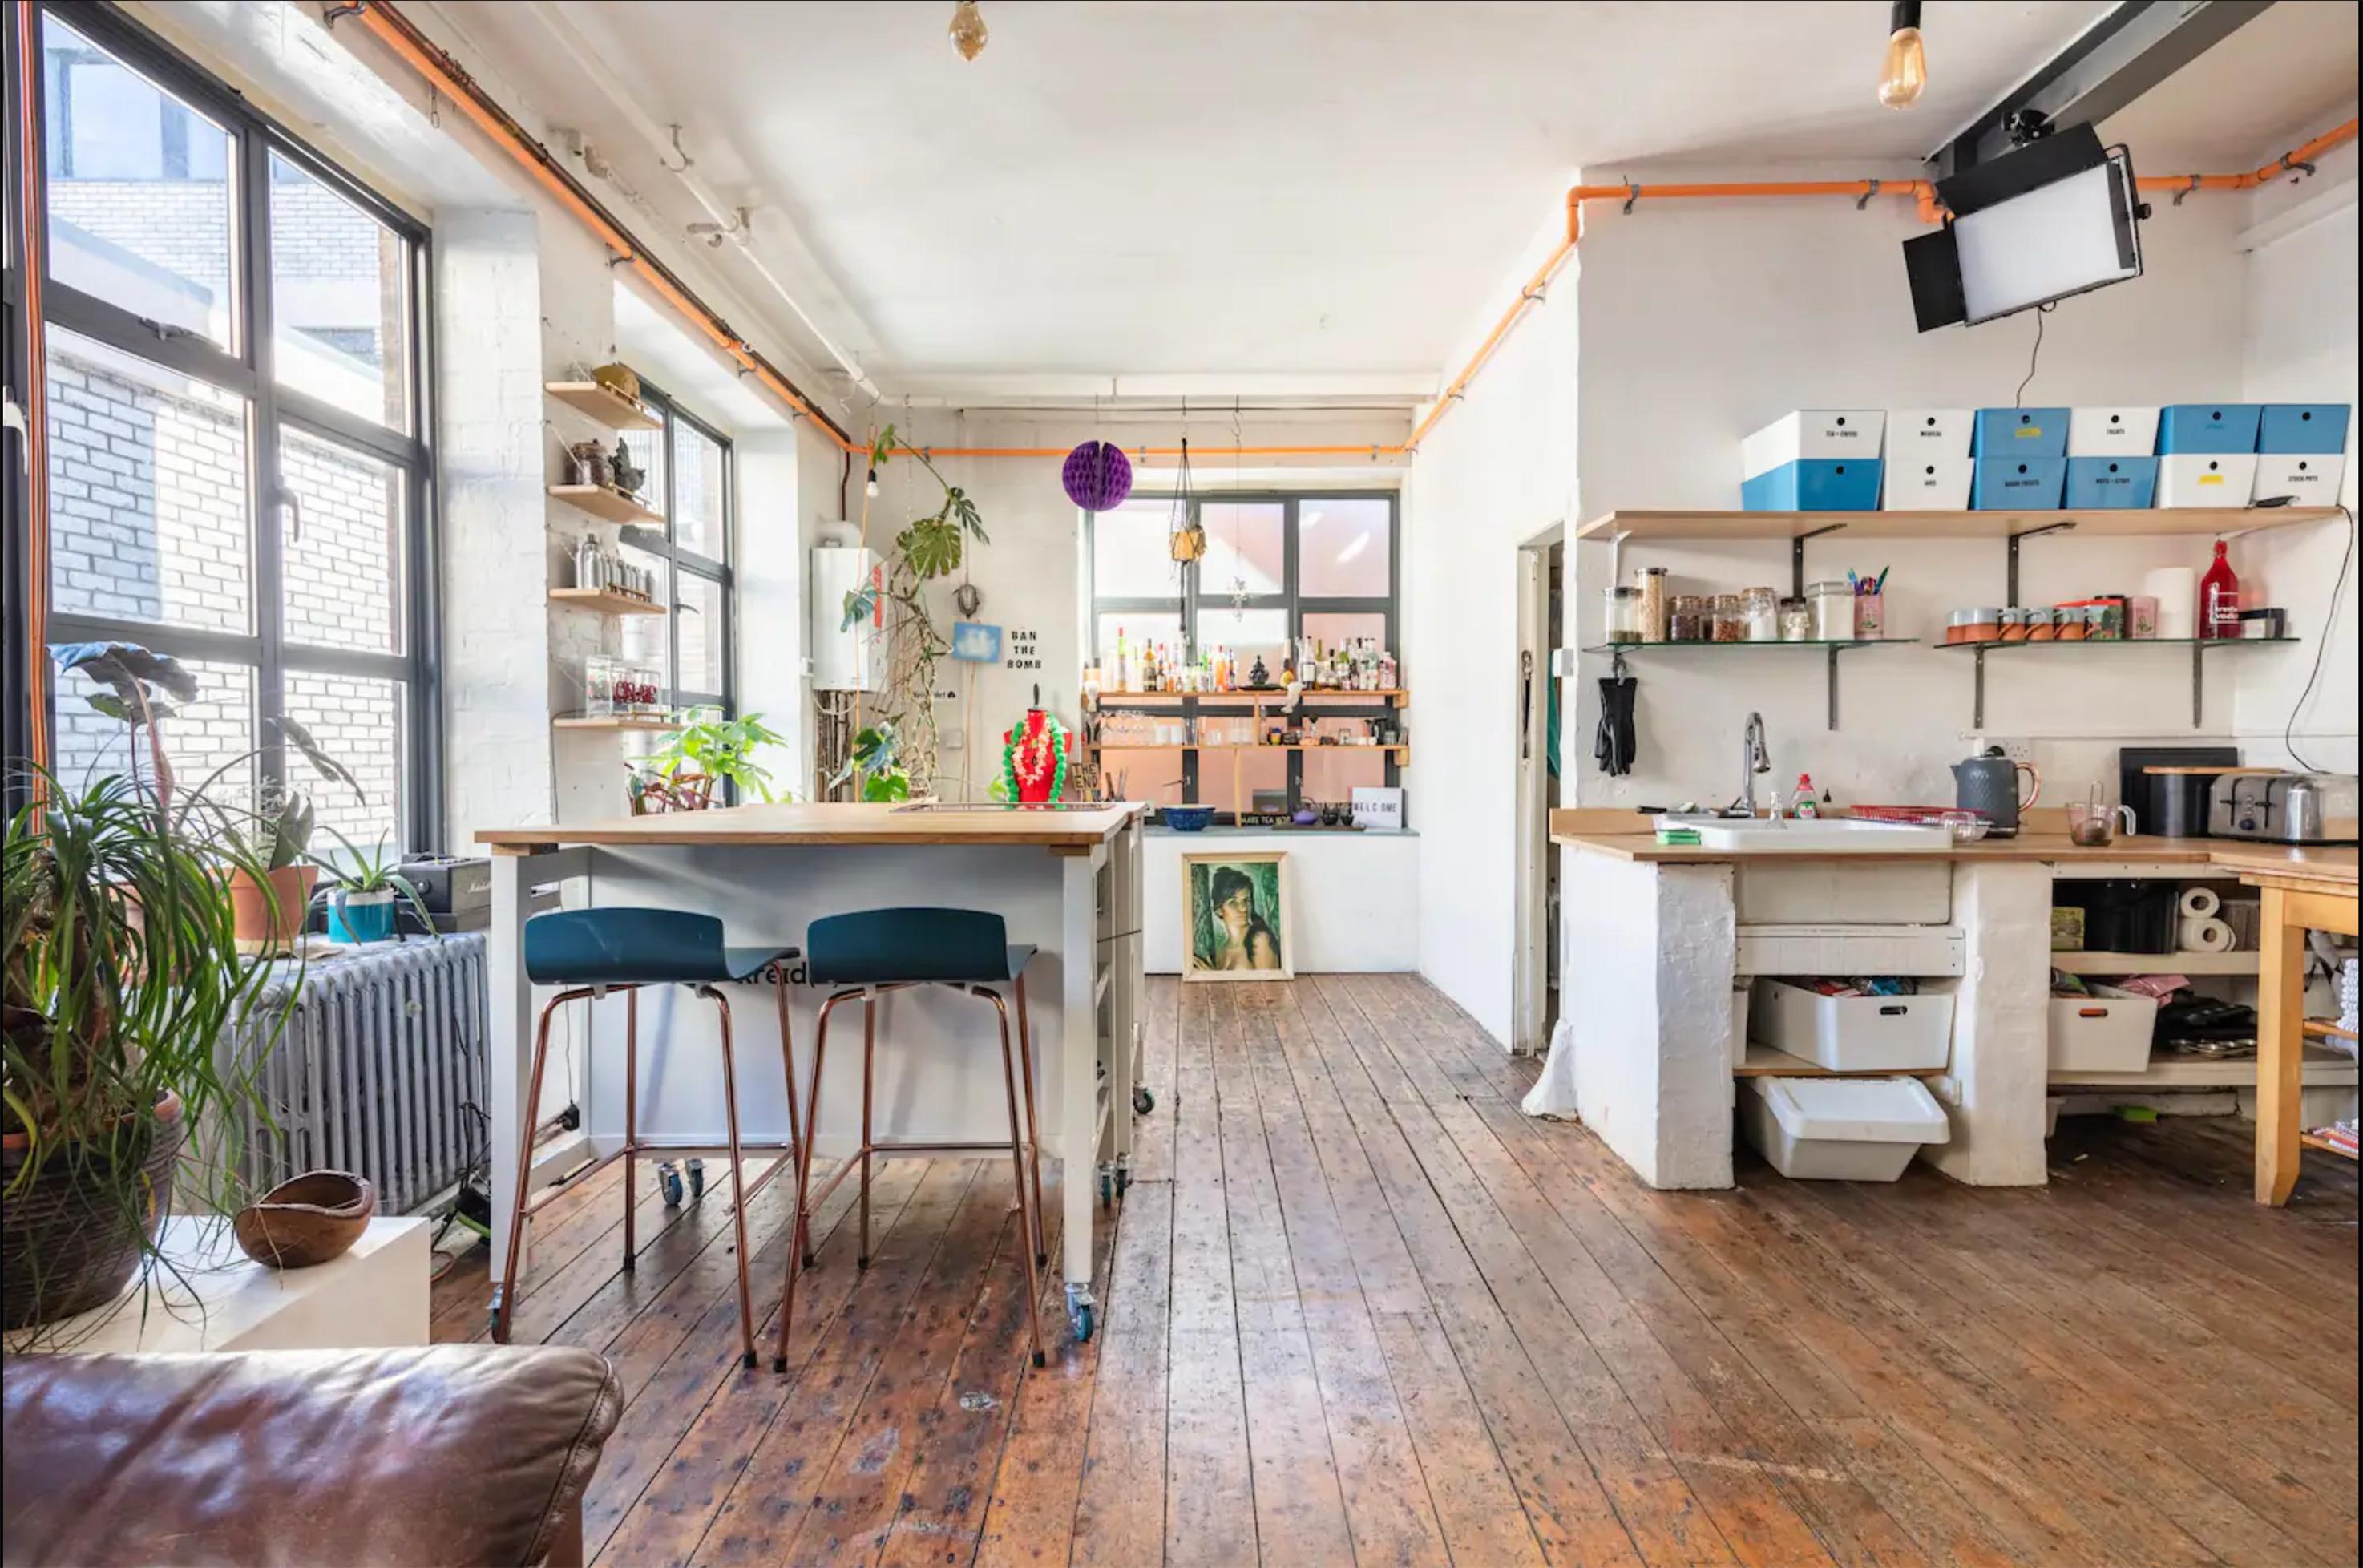 Full Apartment, Artist Warehouse In Hackney - Photoshoot / Interview / Video / Food Photography photo #2